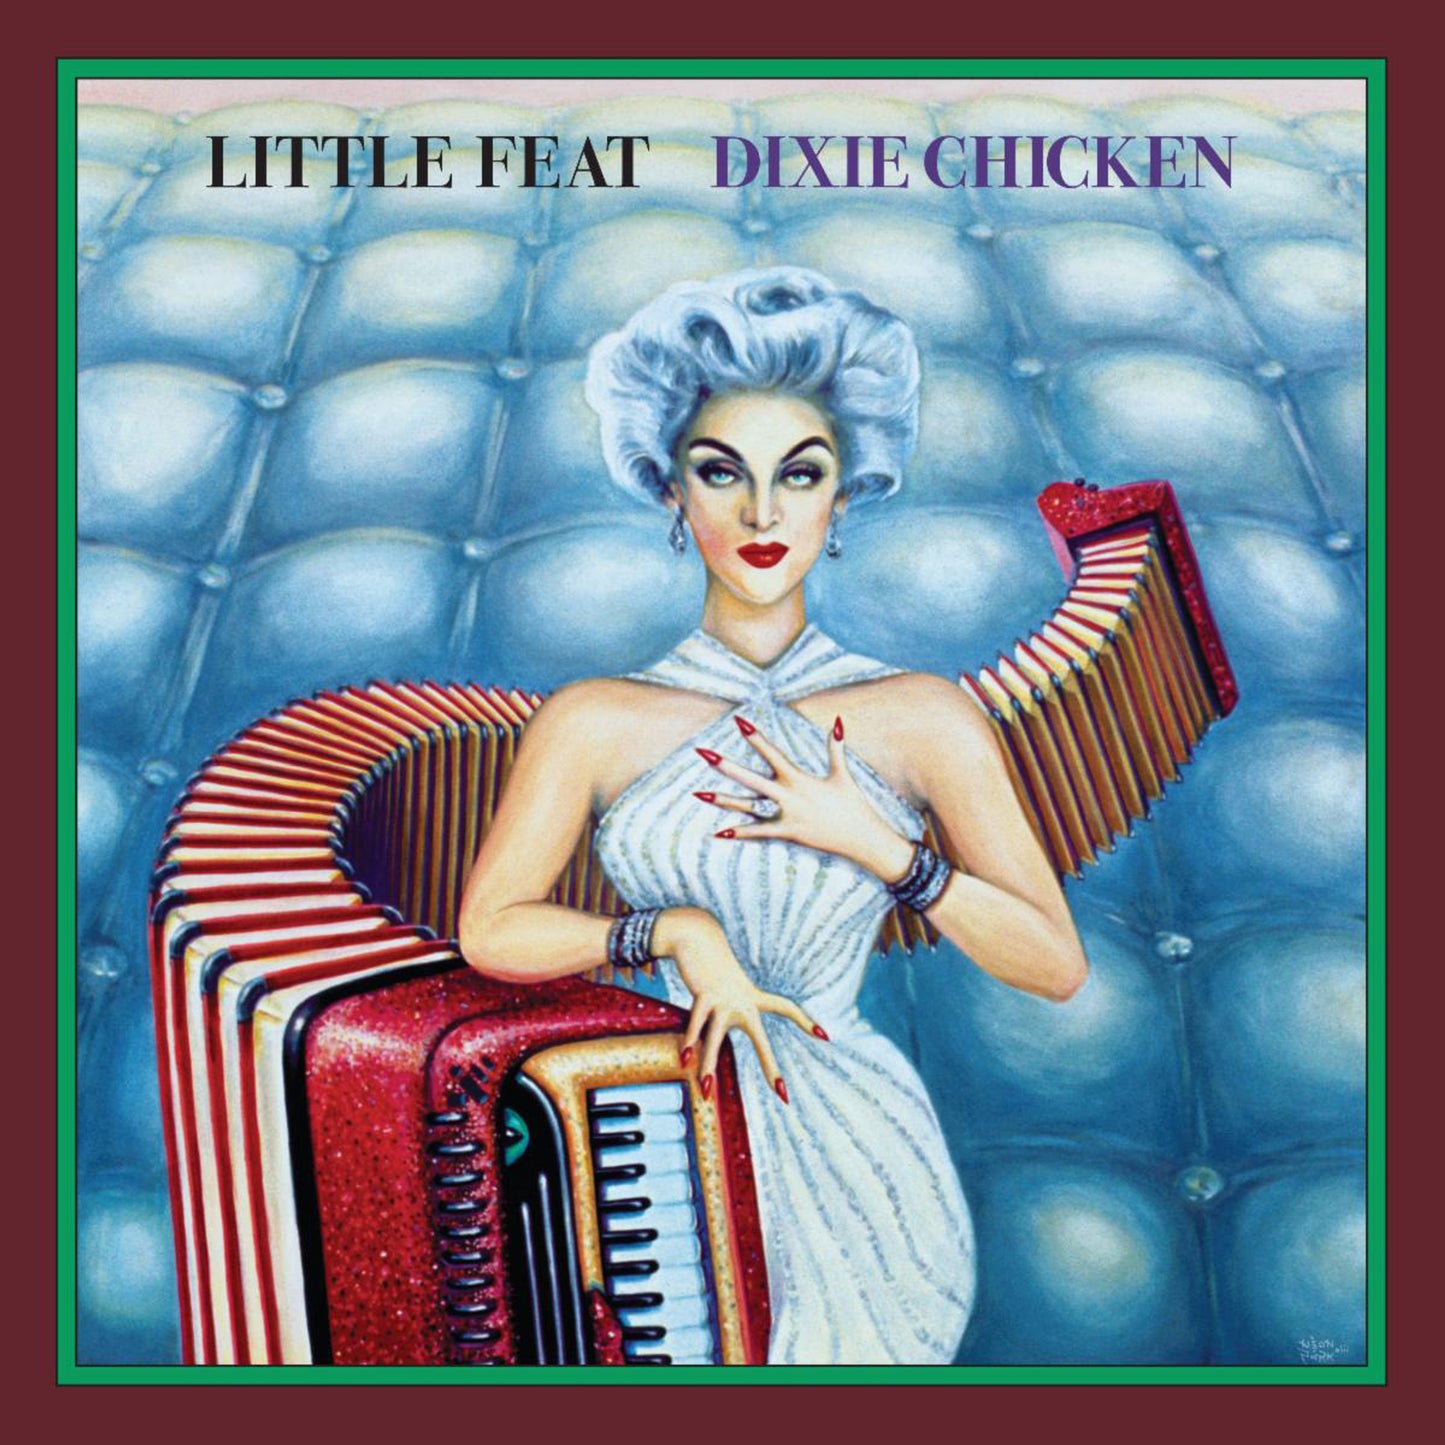 Little Feat – Dixie Chicken (Deluxe Edition) – LP 